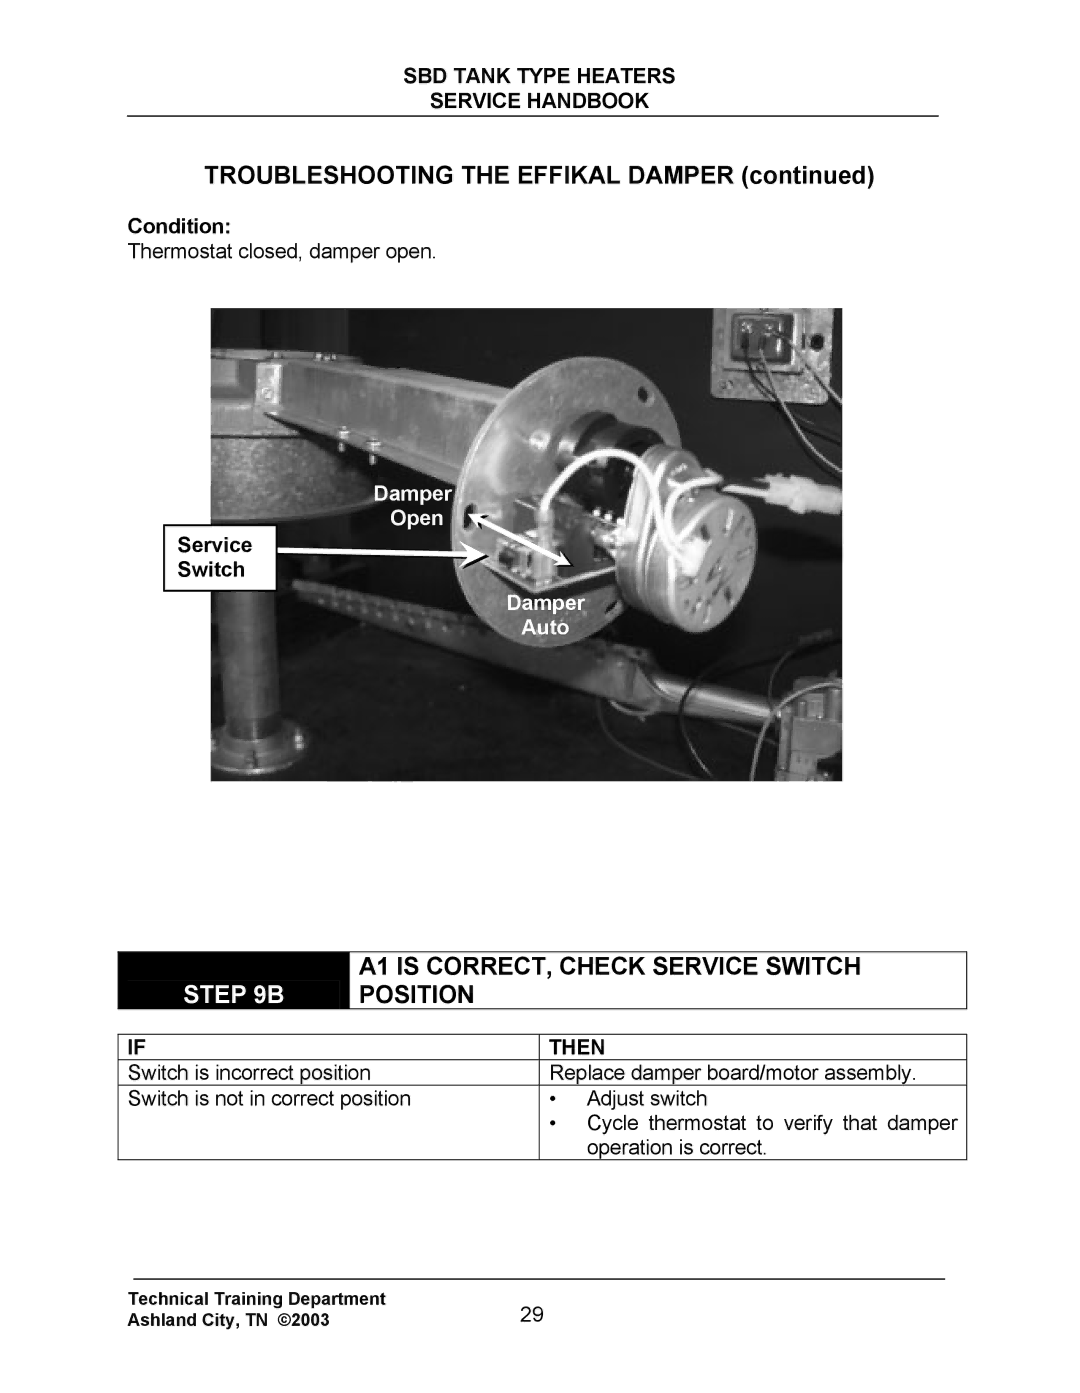 State Industries SBD85 500, SBD71 120 manual A1 is CORRECT, Check Service Switch Position 